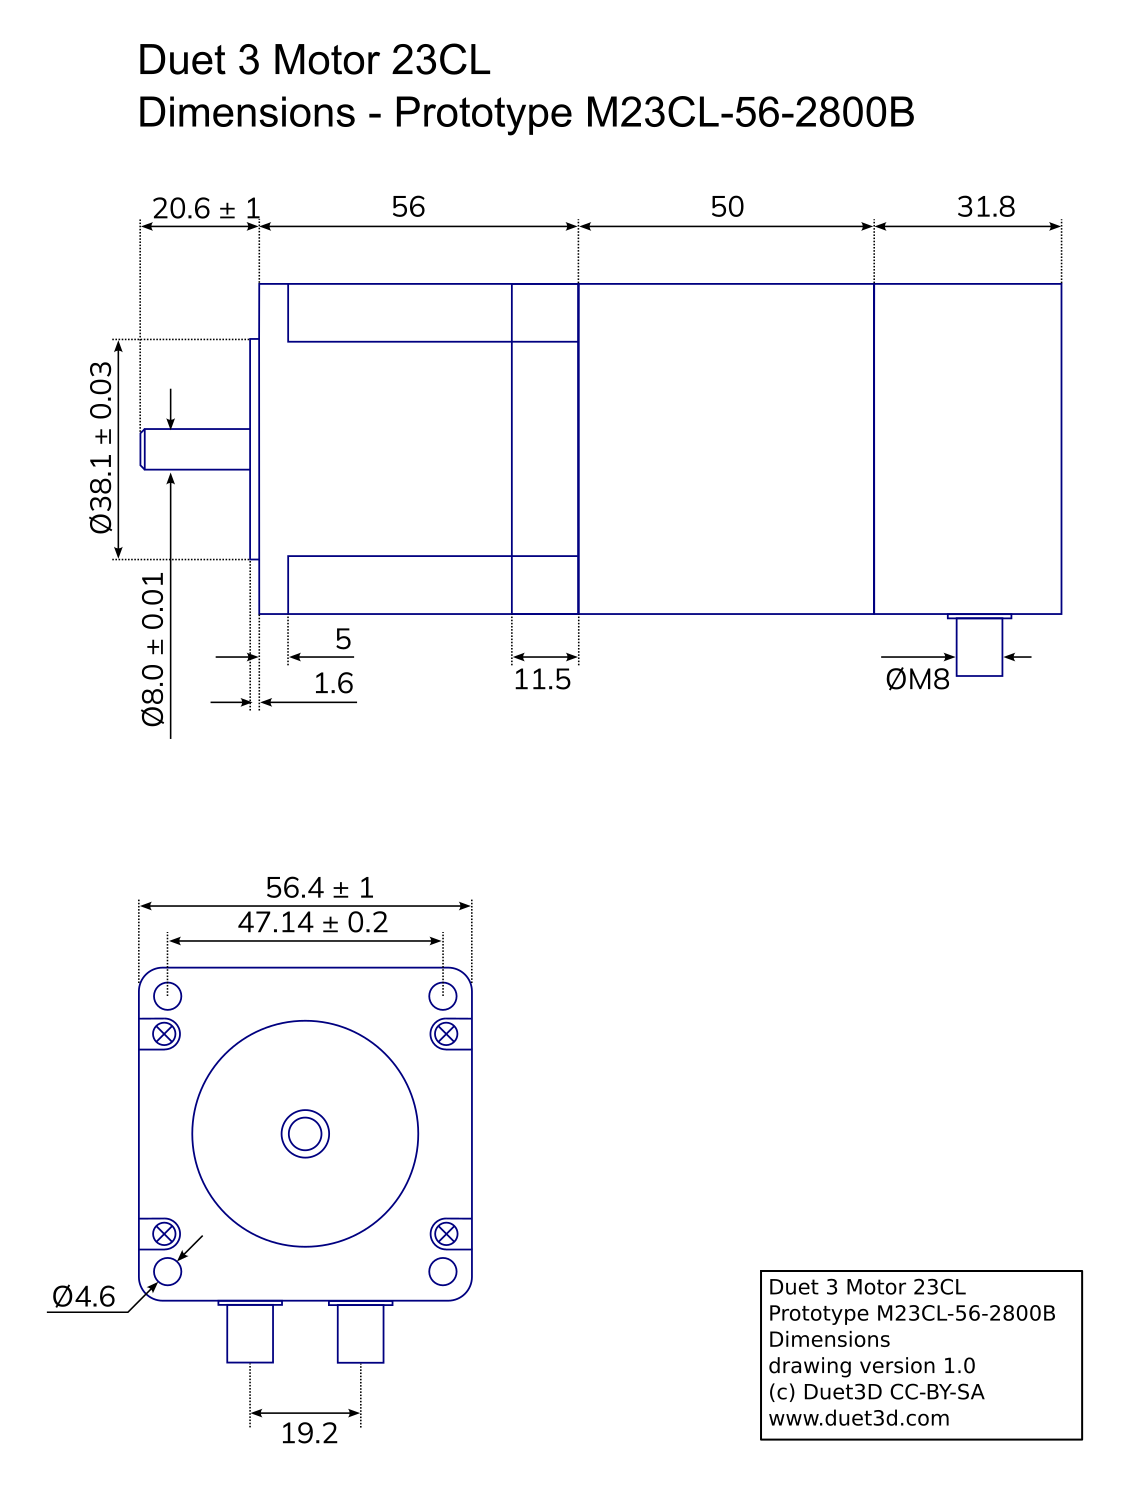 Image showing the key dimensions of the Duet 3 motor 23CL prototype